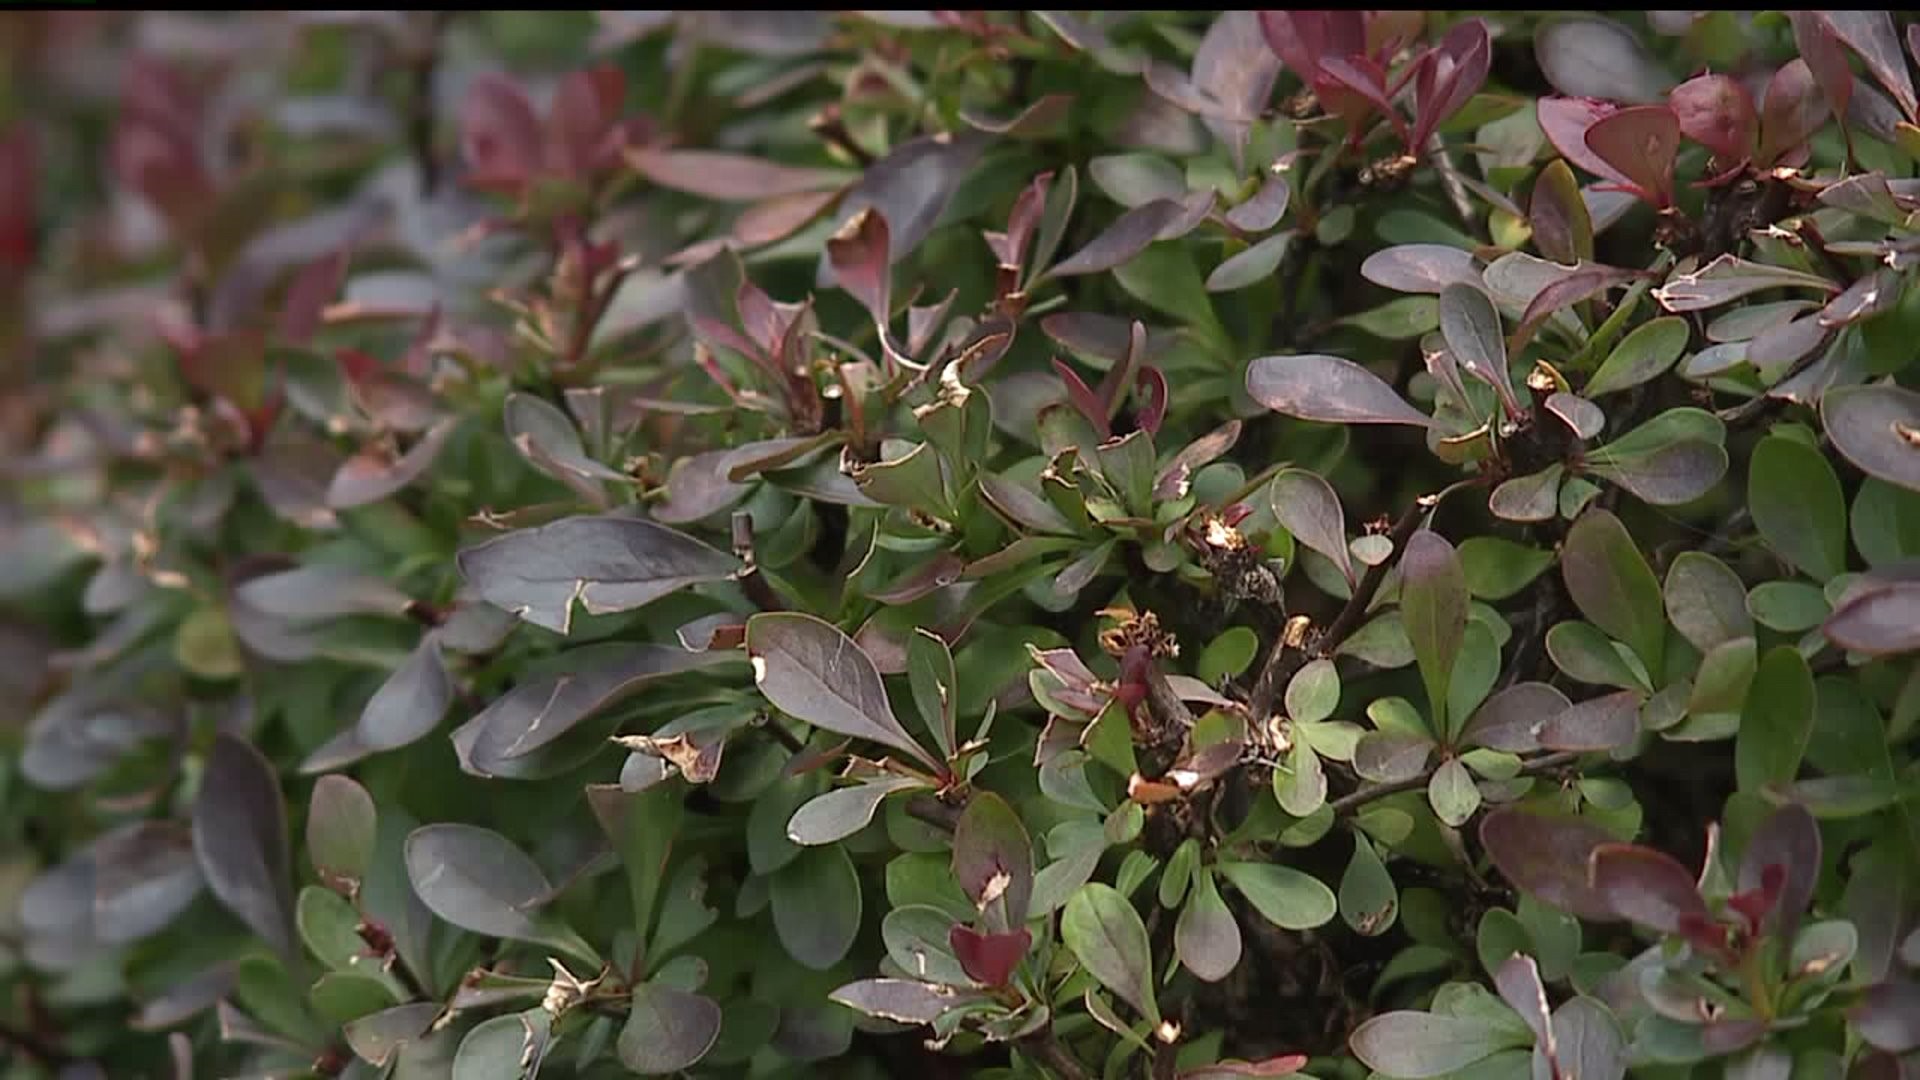 Future of Japanese Barberry shrub could be on chopping block in PA